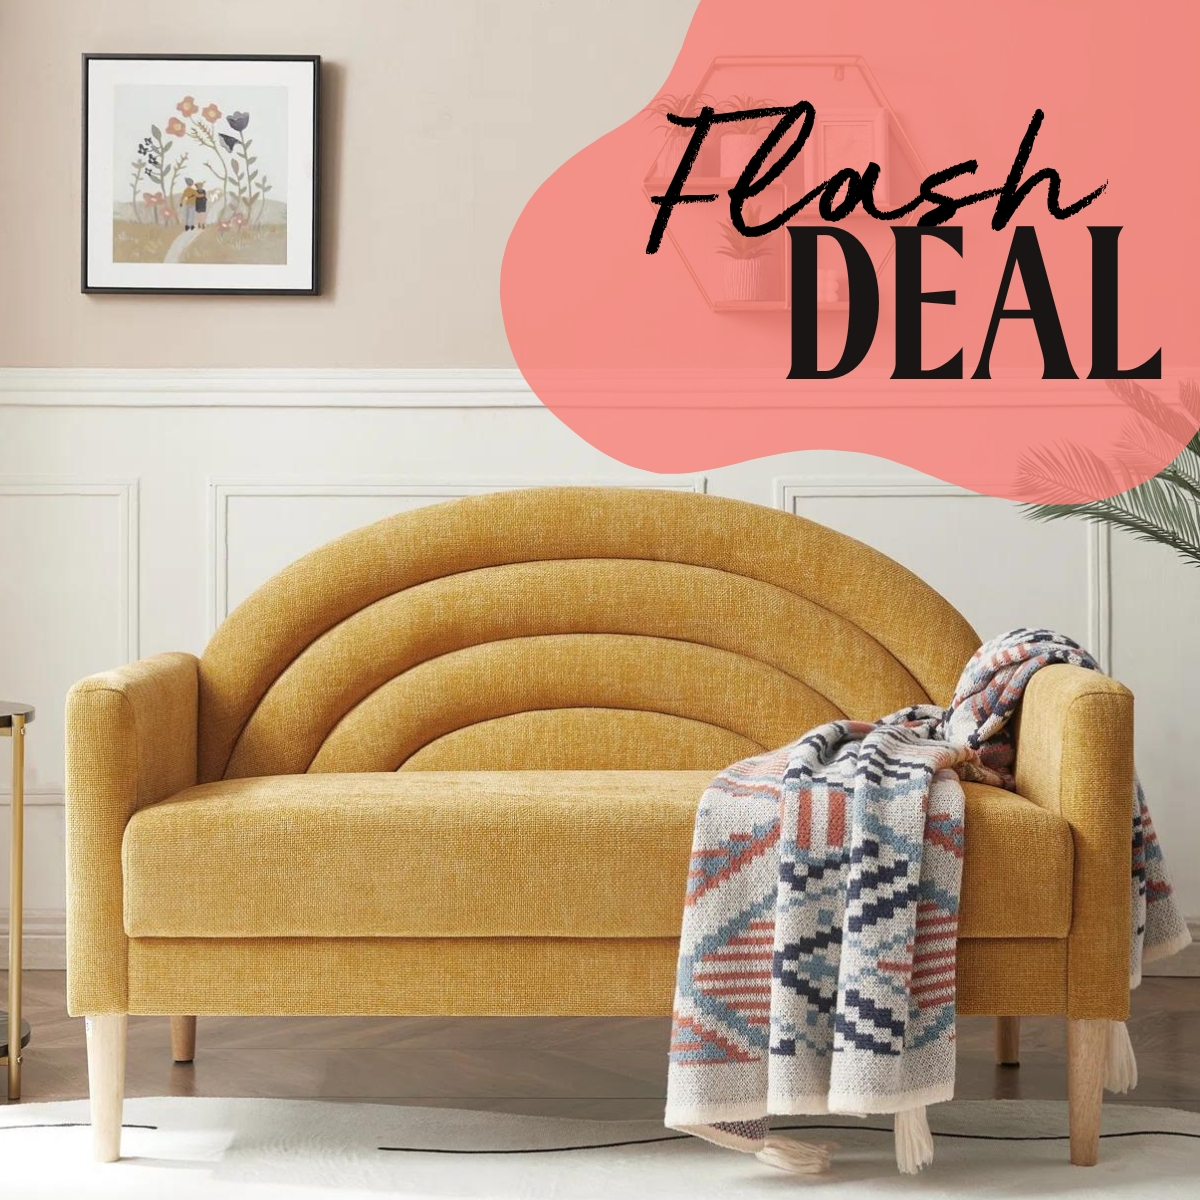 The Best Deals From Wayfair’s Memorial Day Sale Are Up to 83% Off